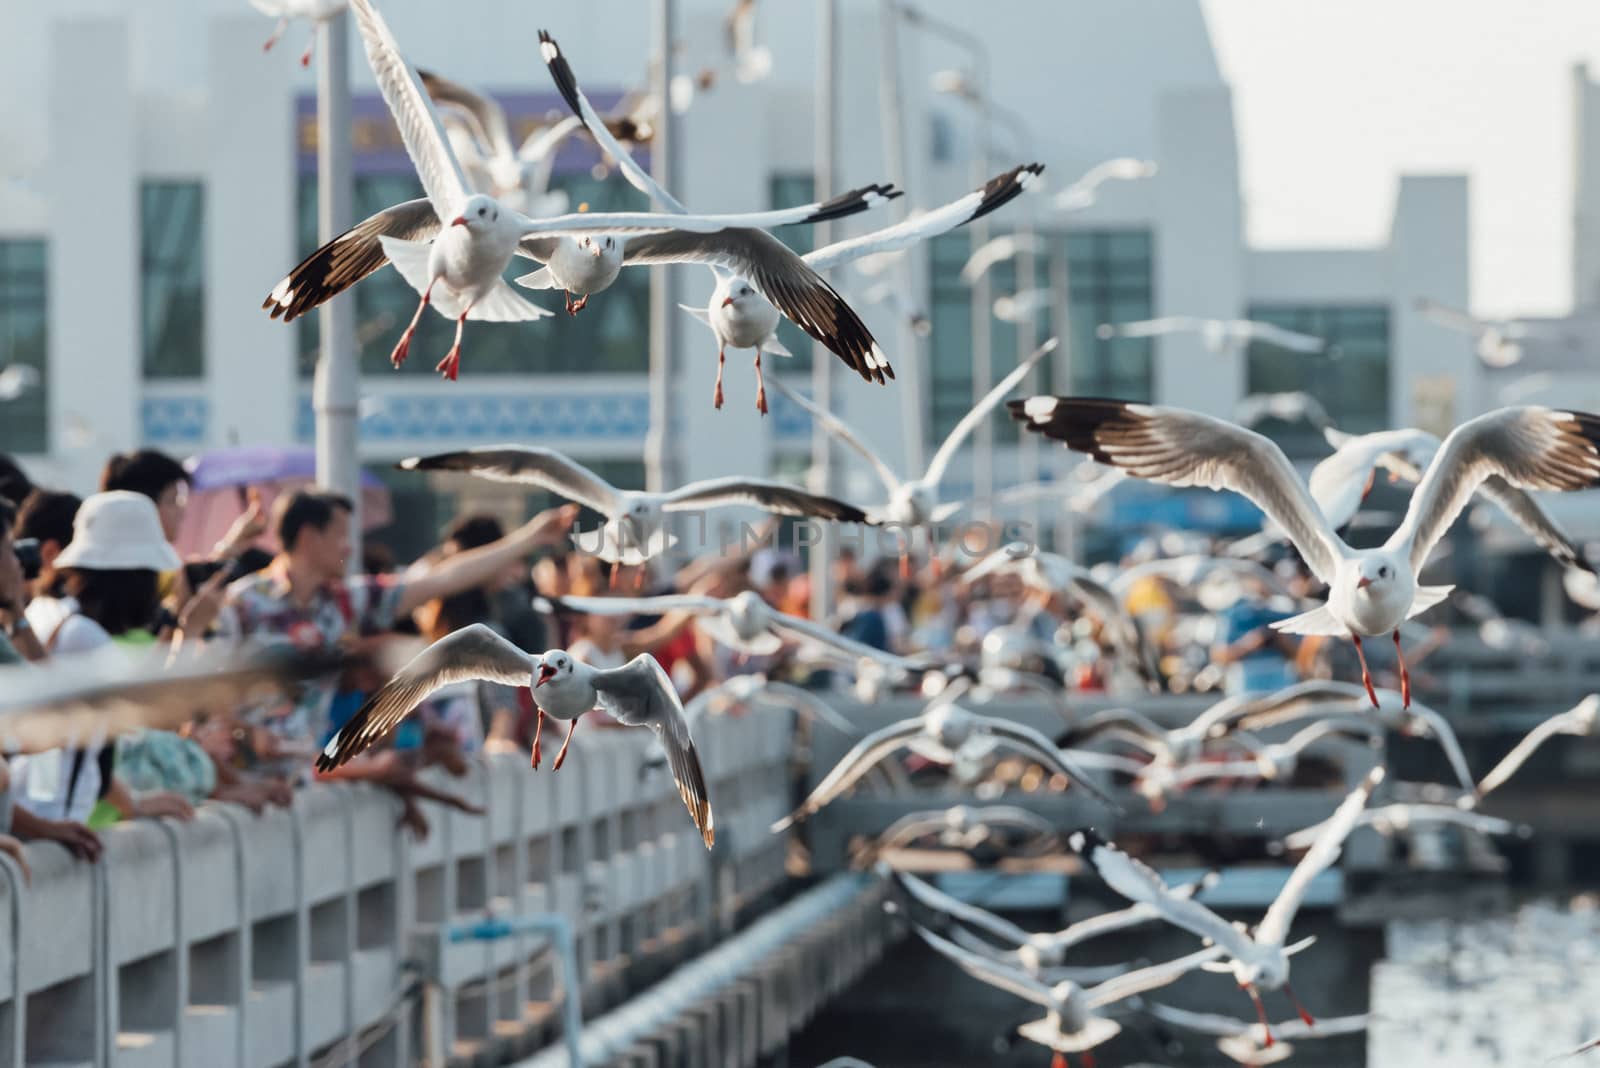 Bang Pu provides habitat for large flocks of migratory seagulls annually in the early winter visitors can enjoy with feeding thousands of seagulls